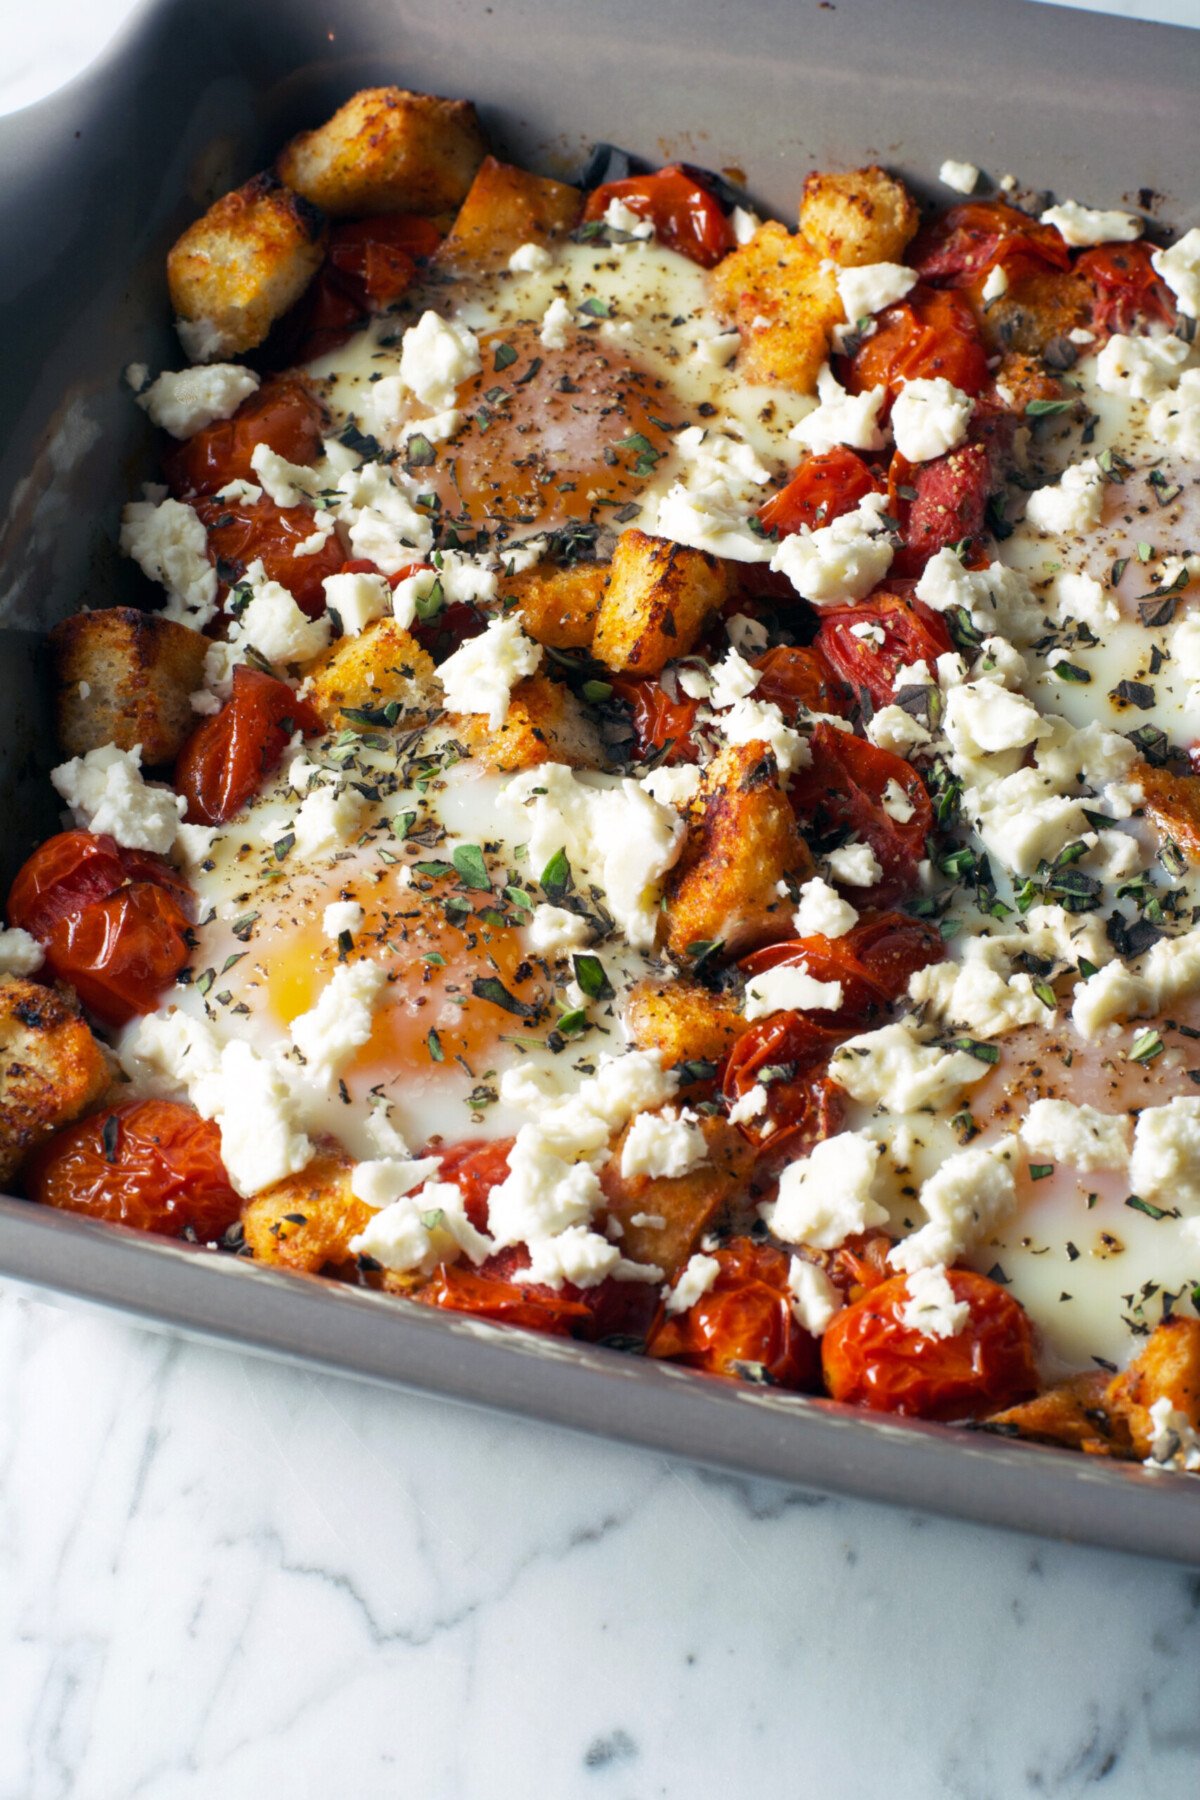 Baked Eggs with Tomatoes, Feta, and Croutons | Zestful Kitchen